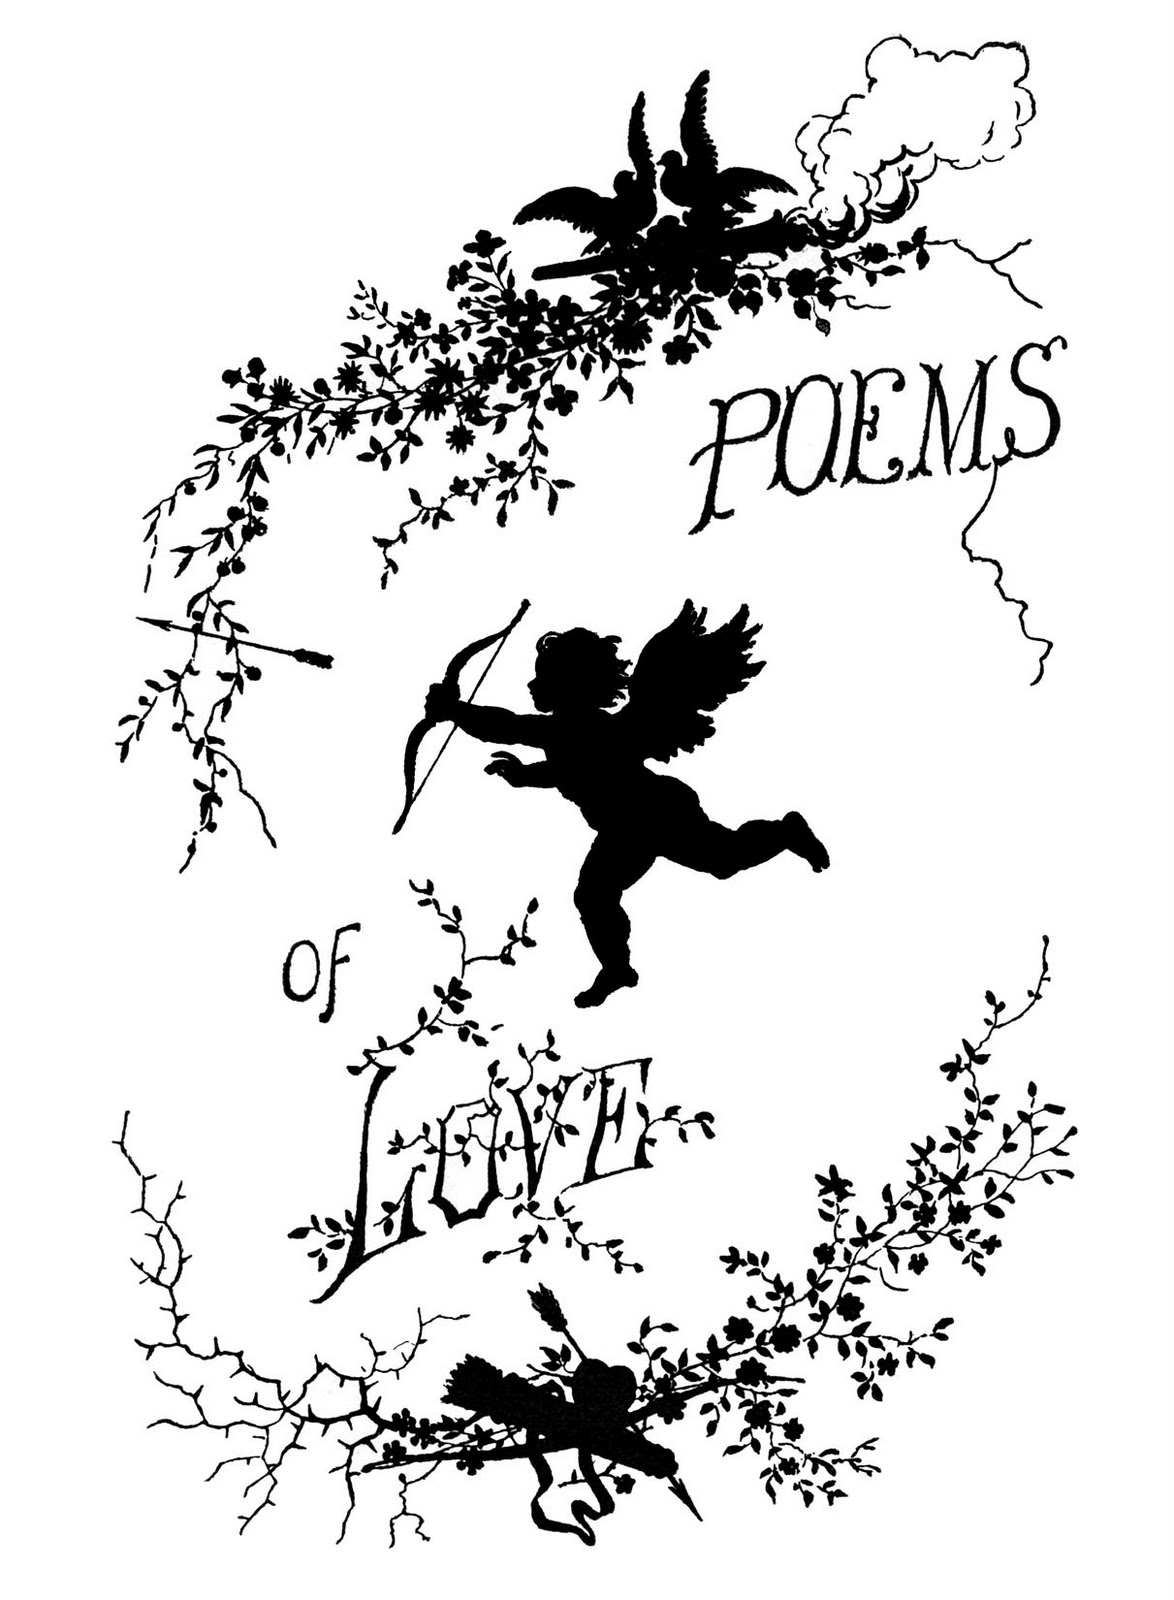 Vintage Clip Art - Poems of Love Silhouette - Cupid - The Graphics Fairy